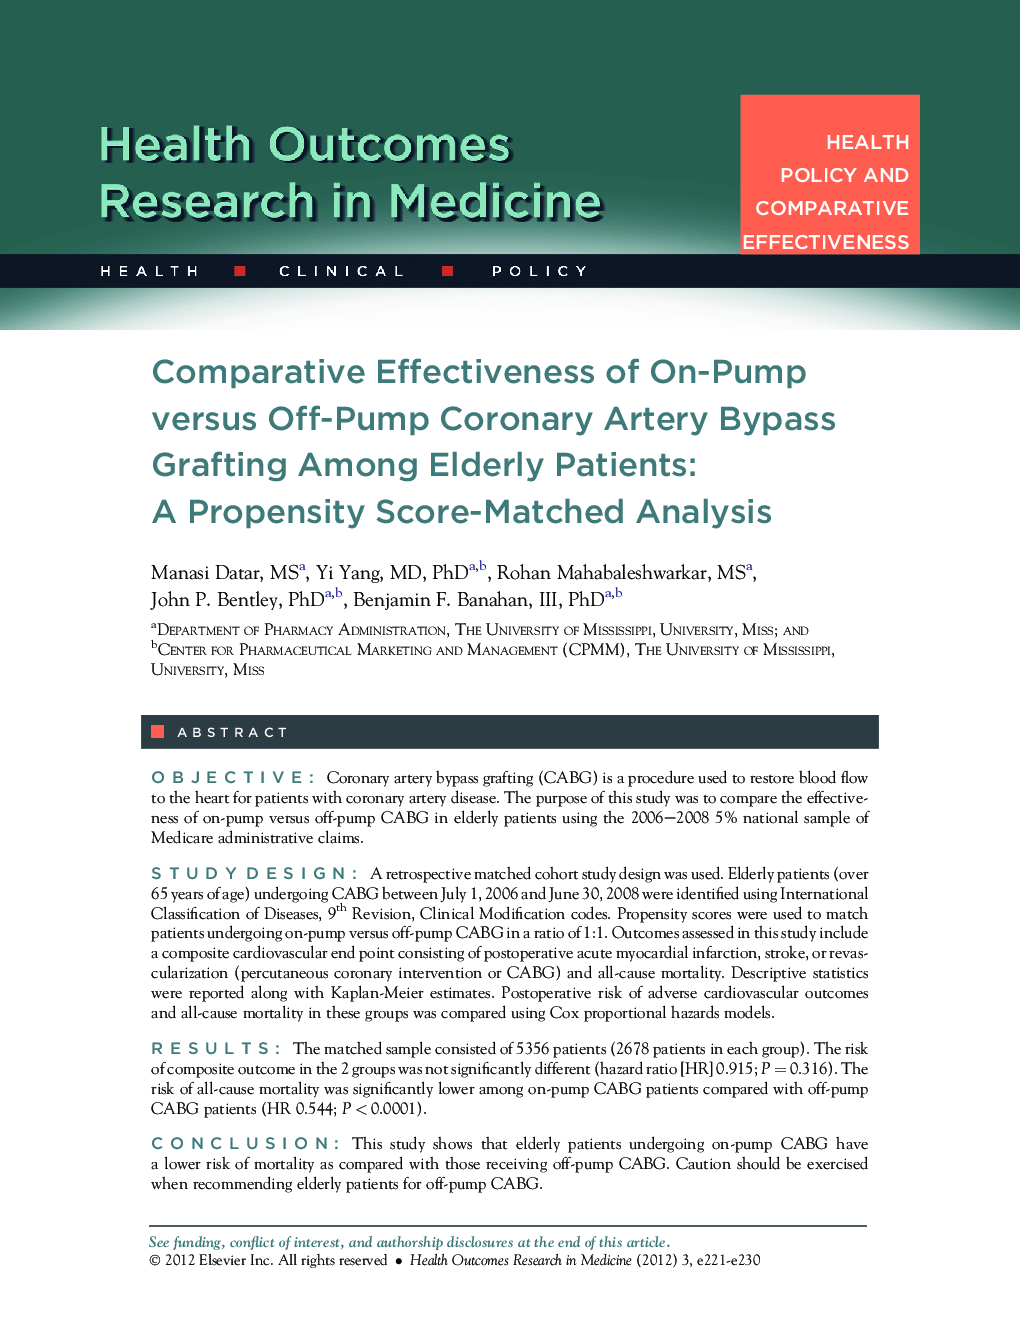 Comparative Effectiveness of On-Pump versus Off-Pump Coronary Artery Bypass Grafting Among Elderly Patients: A Propensity Score-Matched Analysis 